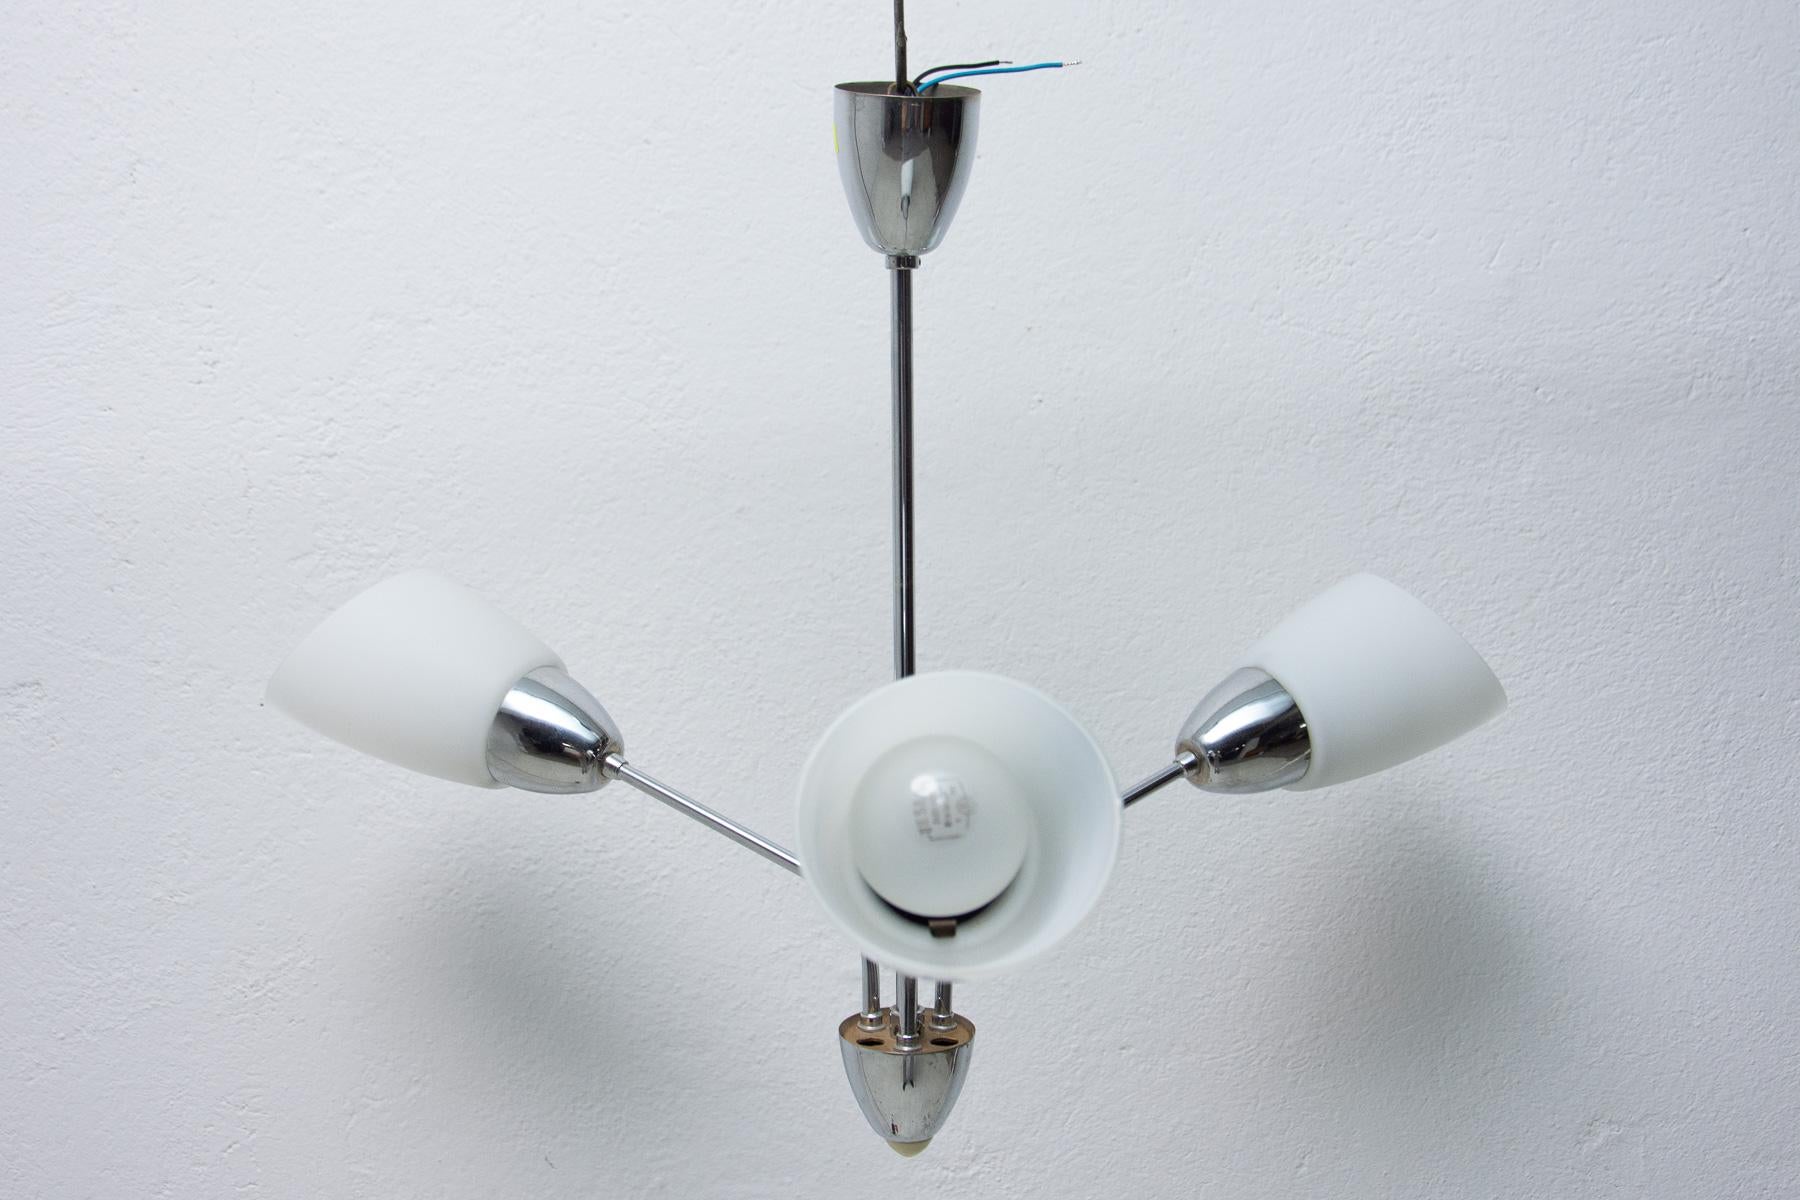 Czechoslovak milky glass and chrome pendant lamp in the shape of flower, made in the former Czechoslovakia in the 1960´s. It features 2 chrome arms with lampshades made of milky glass. In very good condition, new wiring.

Total height: 50